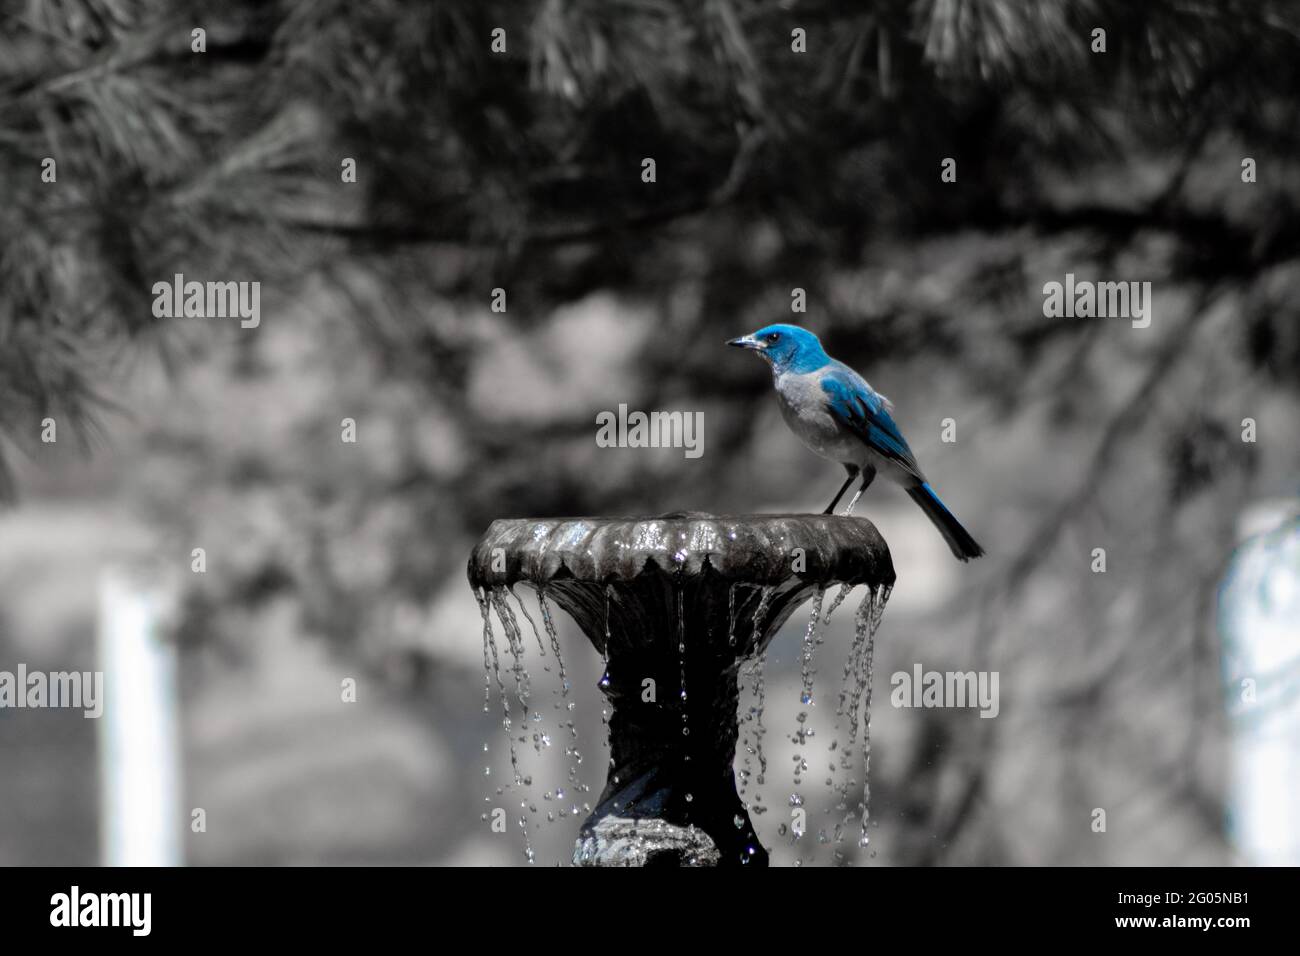 Closeup shot of a blue steller's jay perched on a fountain Stock Photo